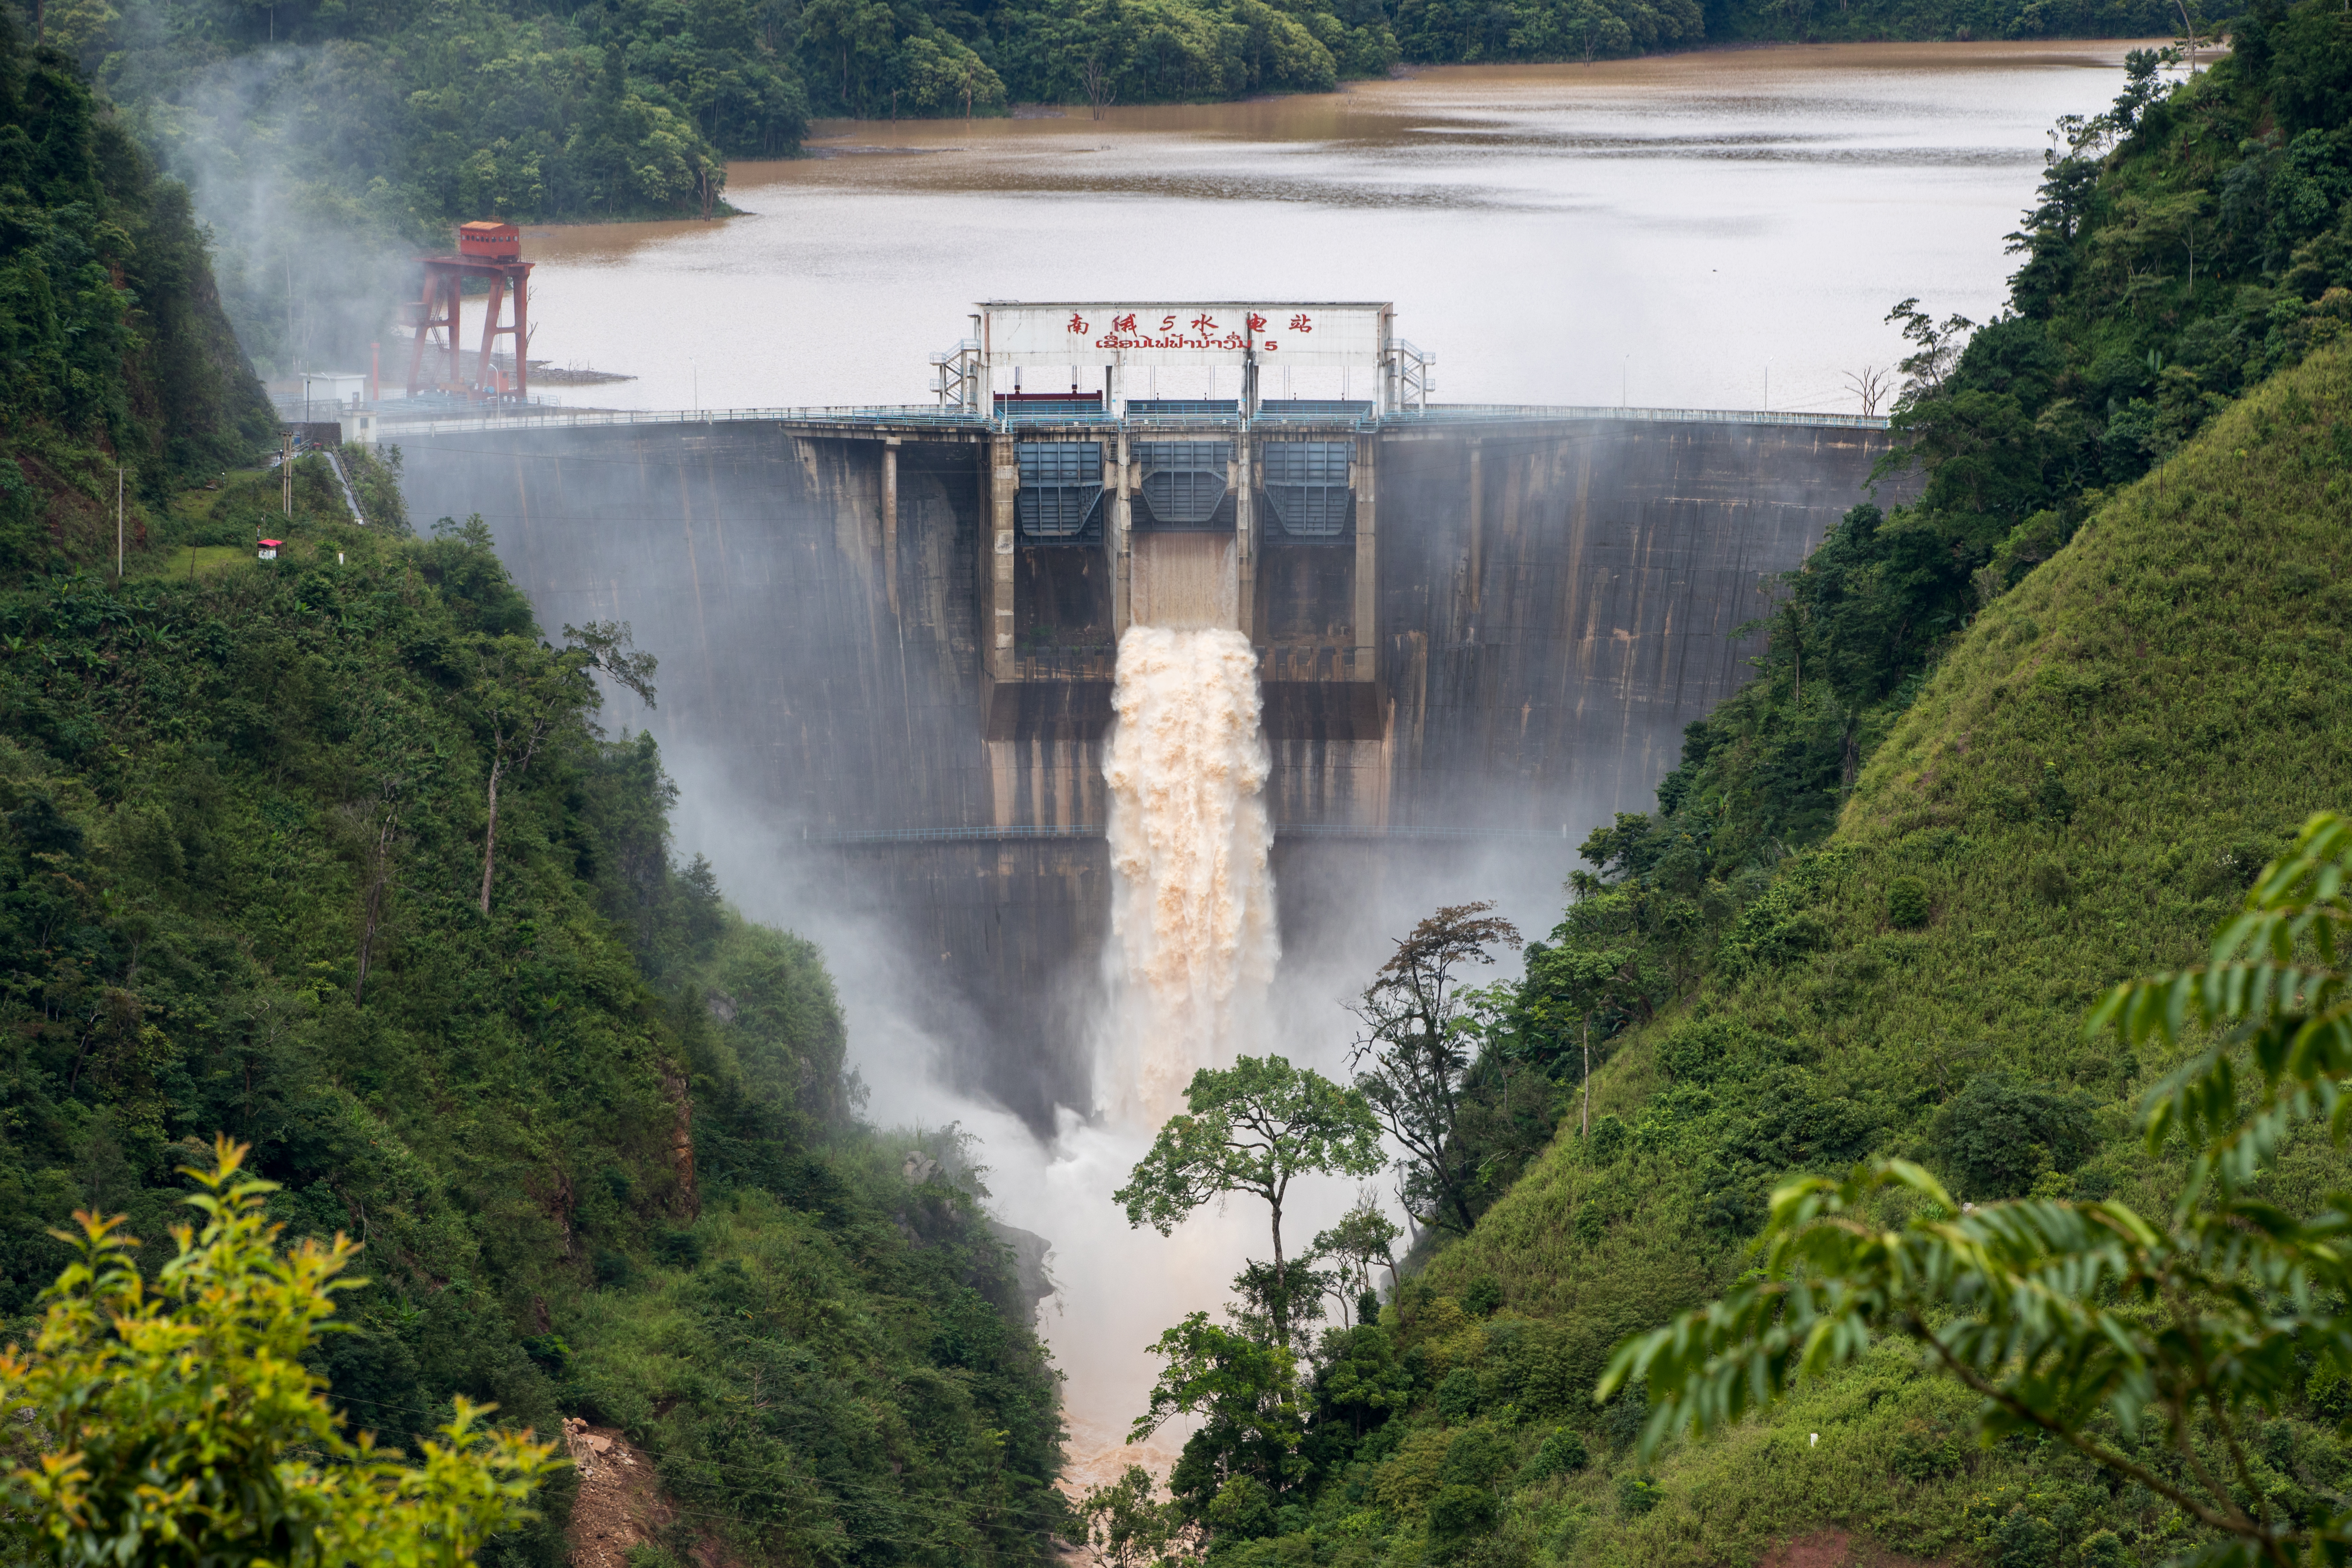 Nam Ngum 5 Hydropower project has operated safely for 4,000 consecutive days